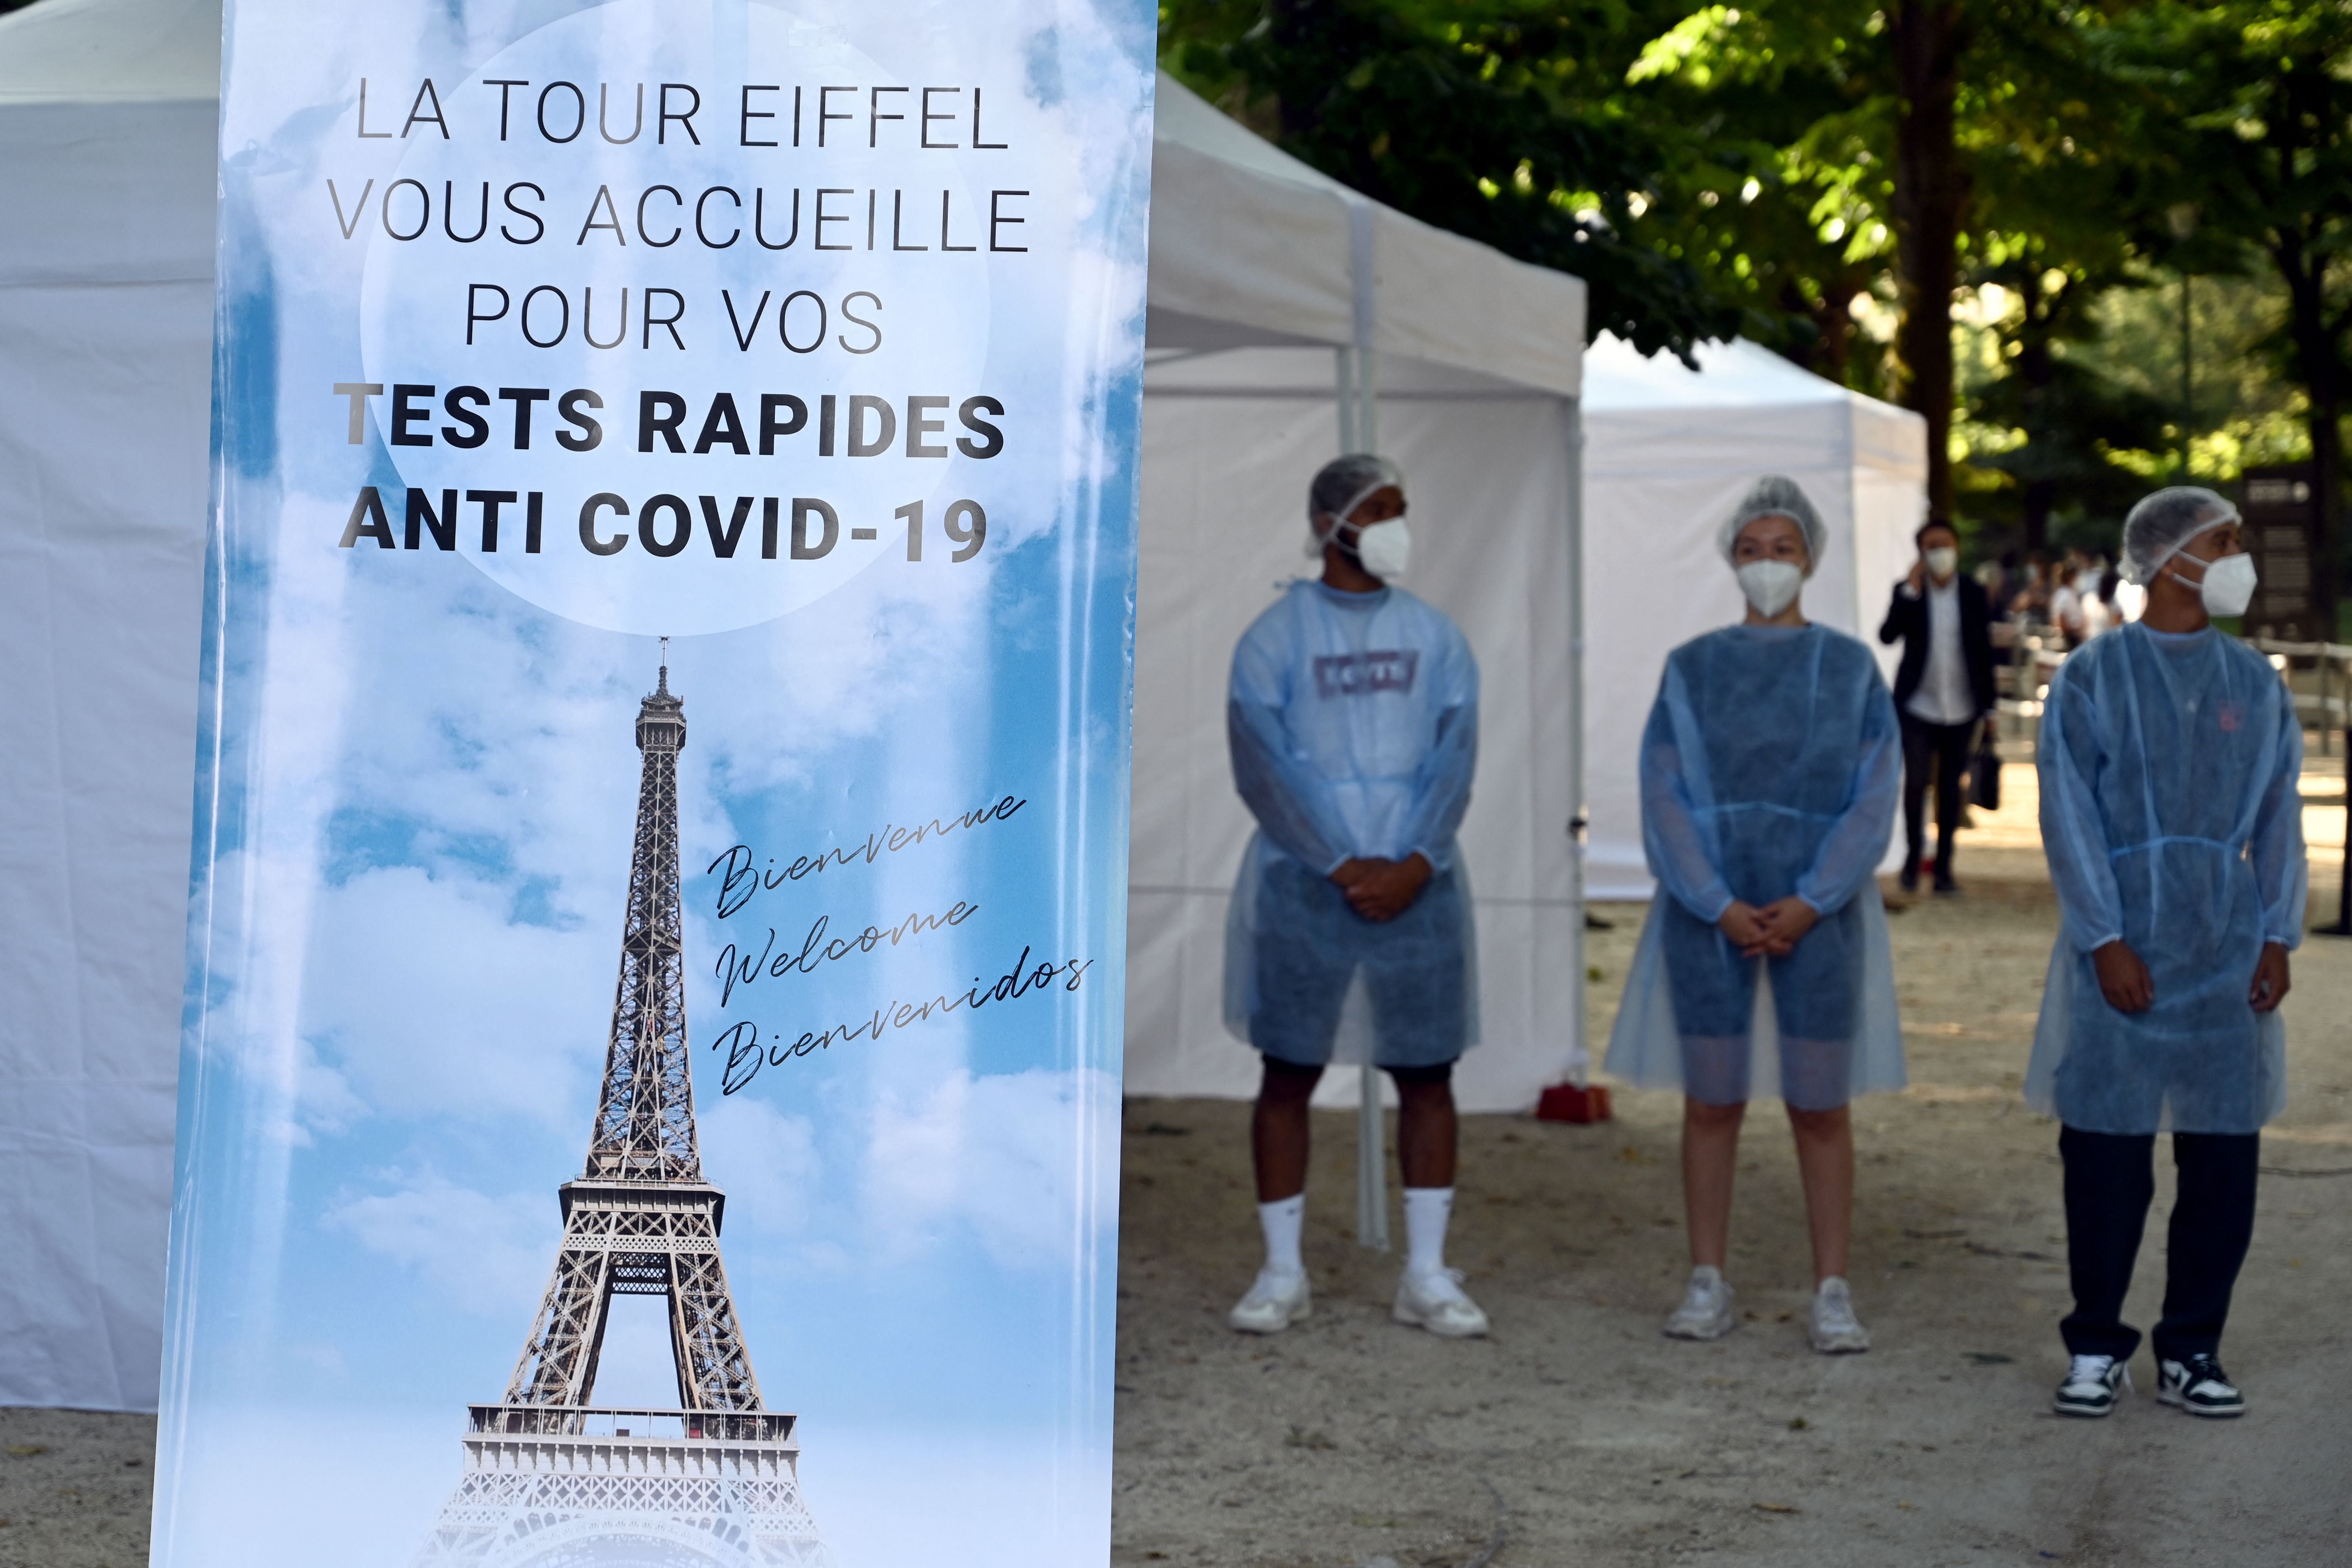 Health workers stands near a Covid-19 antigenic tests area, as a banner reads 'The Eiffel Tower welcomes you for your anti Covid-19 quick tests'